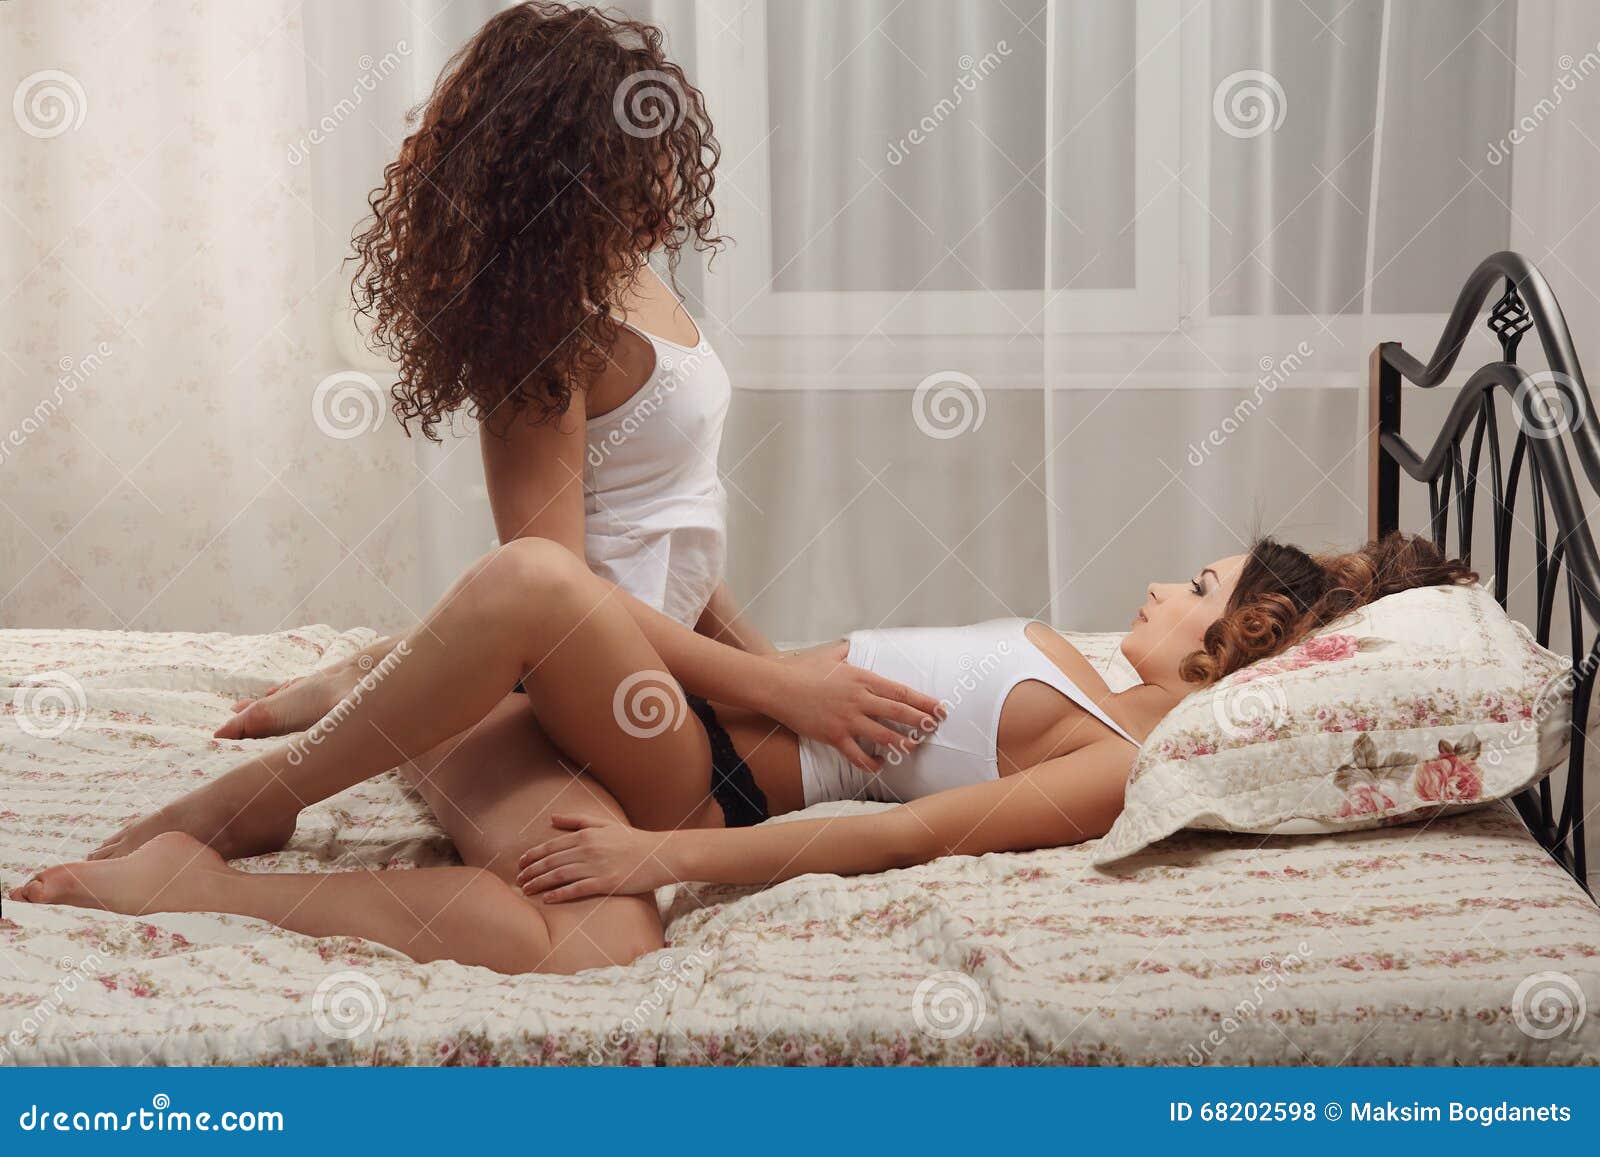 Lesbians foreplay